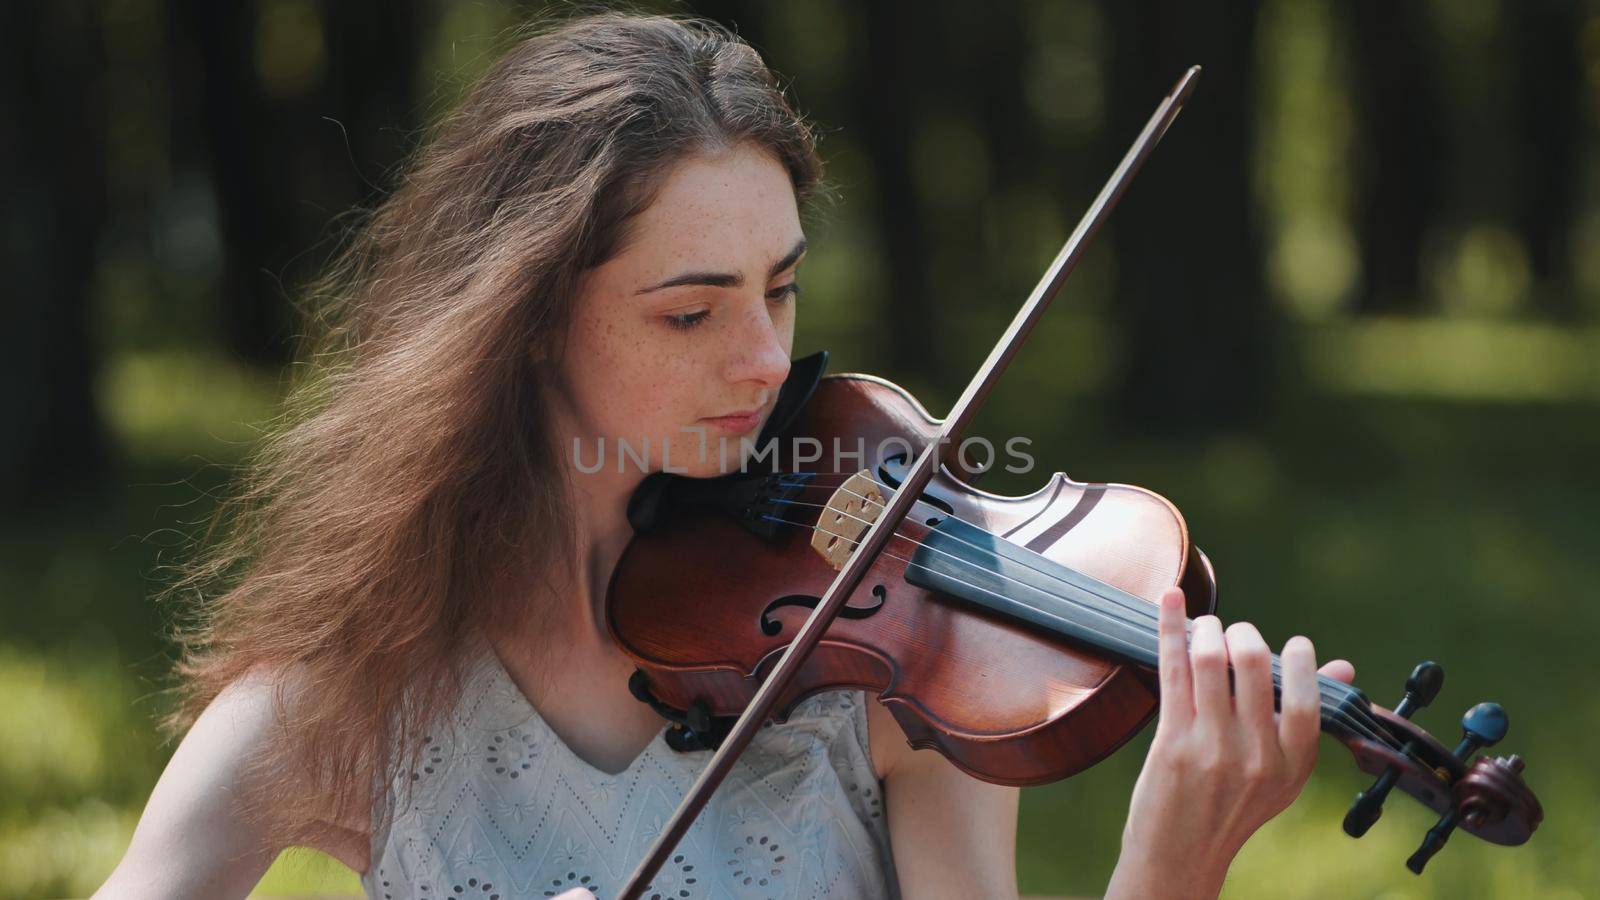 A young girl plays the violin in the city park